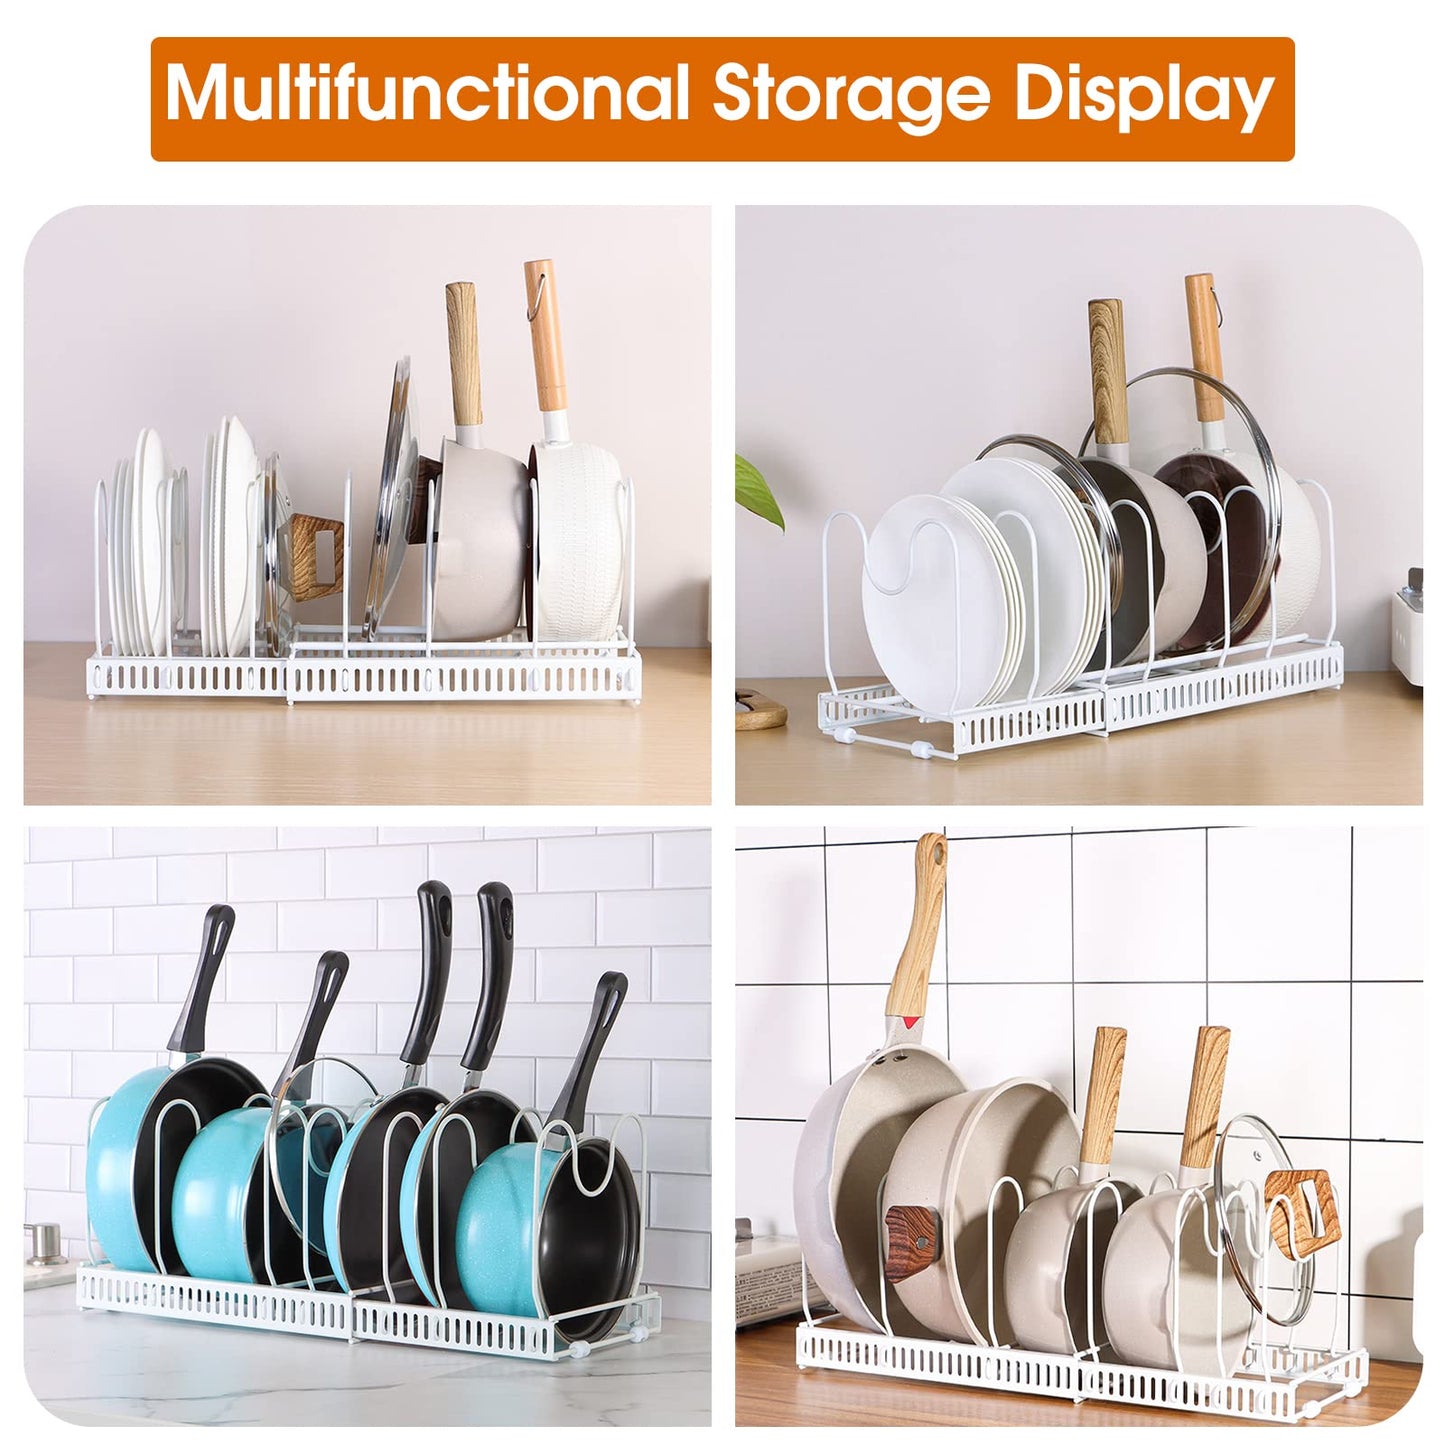 Adjustable Pot and Pan Organizer Expandable Rack Lid Holder Organiser Retractable Storage for Kitchen Cabinet Cookware